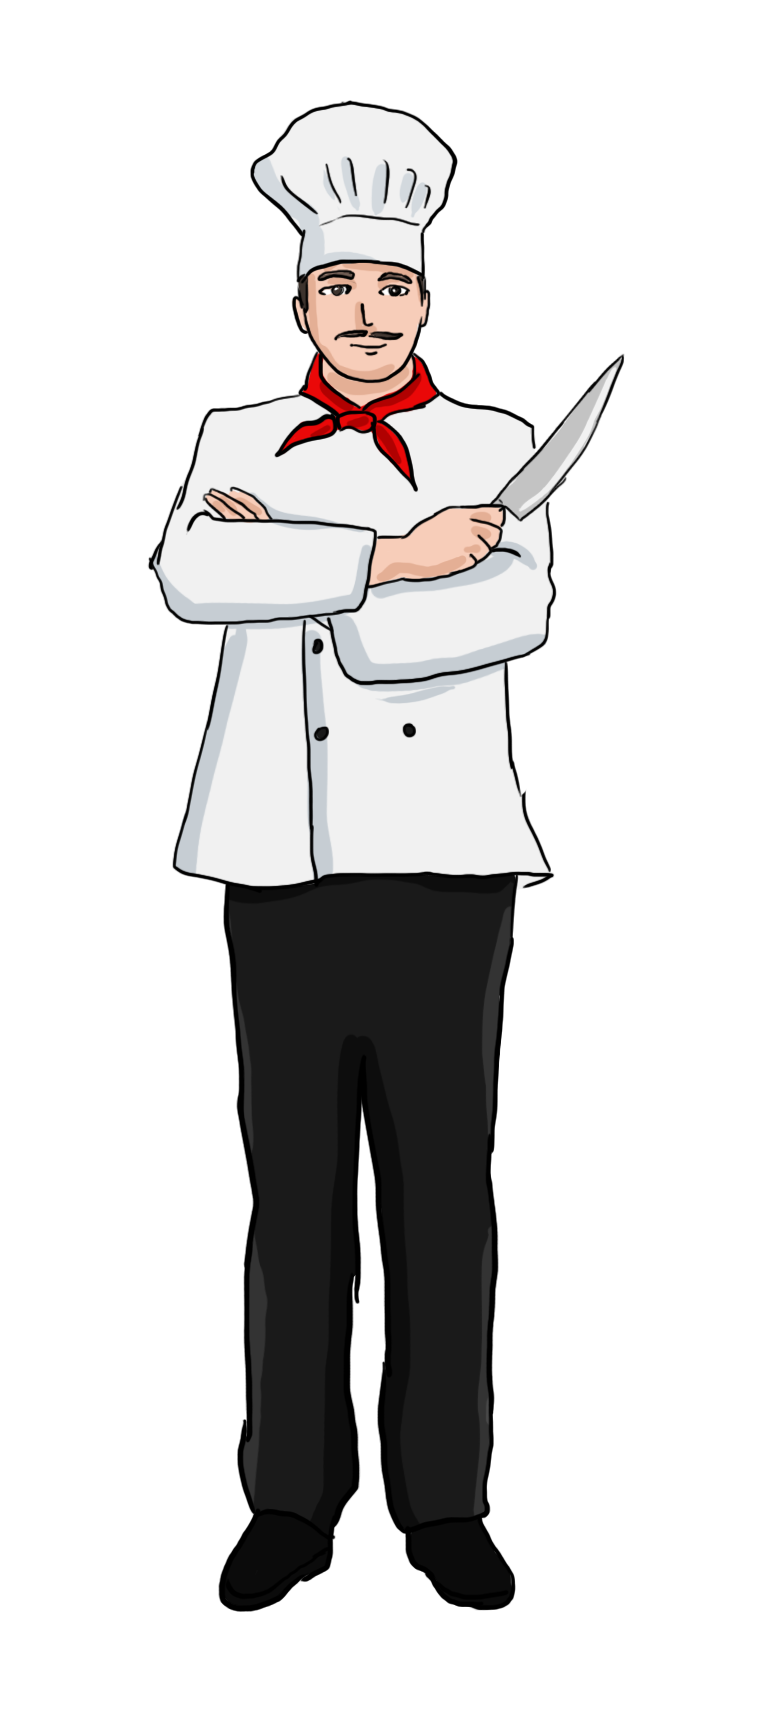 free clipart images chef - photo #39